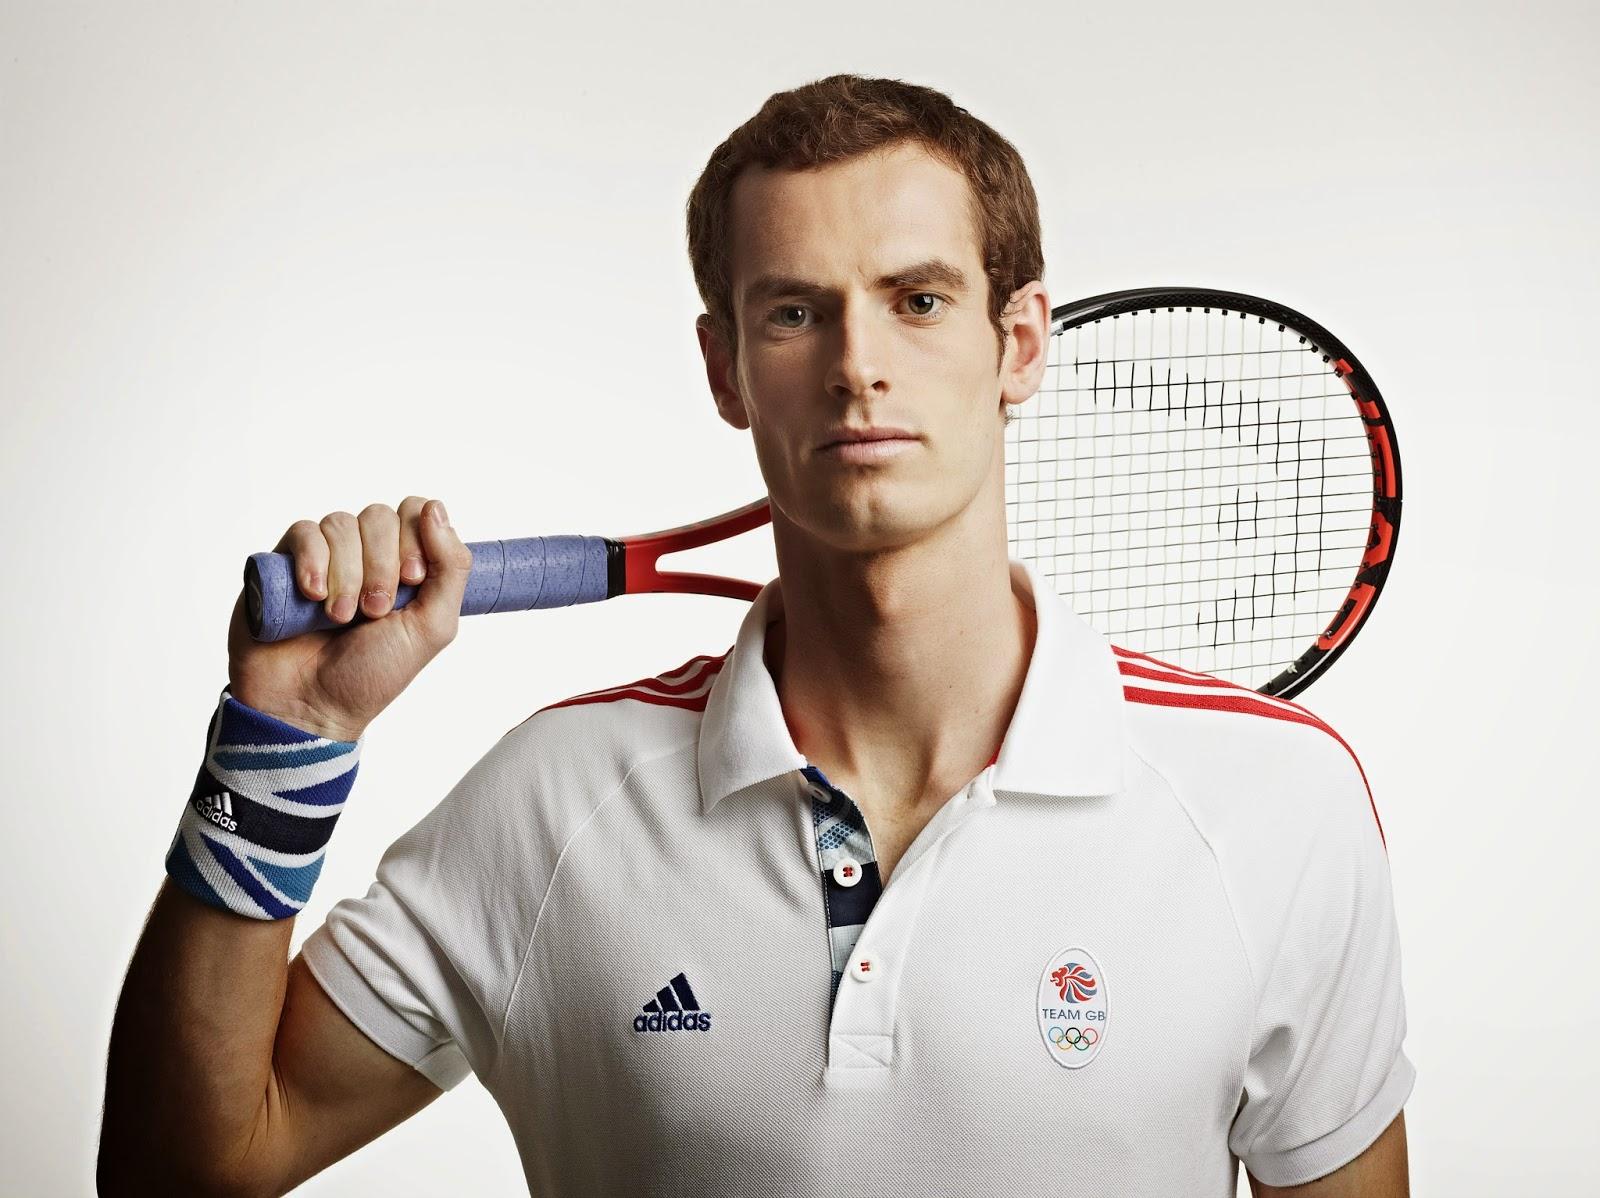 Andy Murray New HD Wallpaper 2014. Lovely Tennis Stars